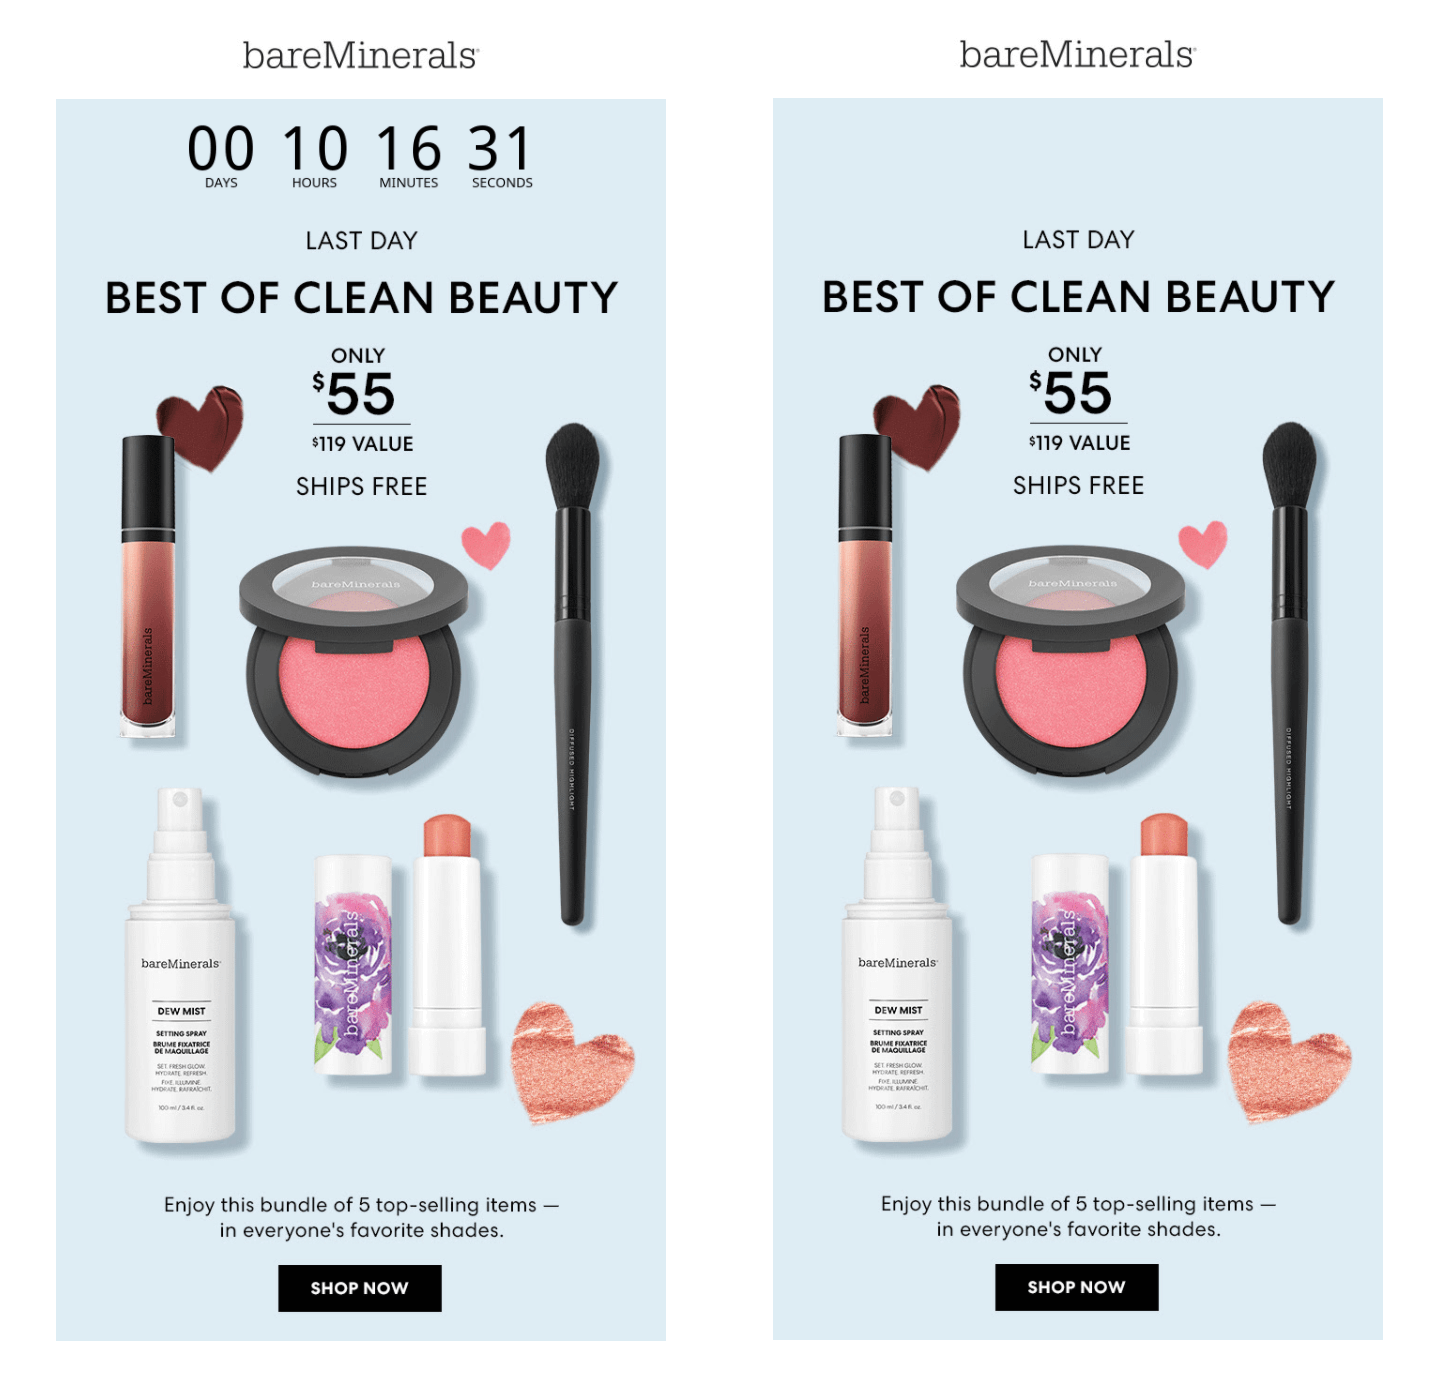 Bareminerals email countdown timer example